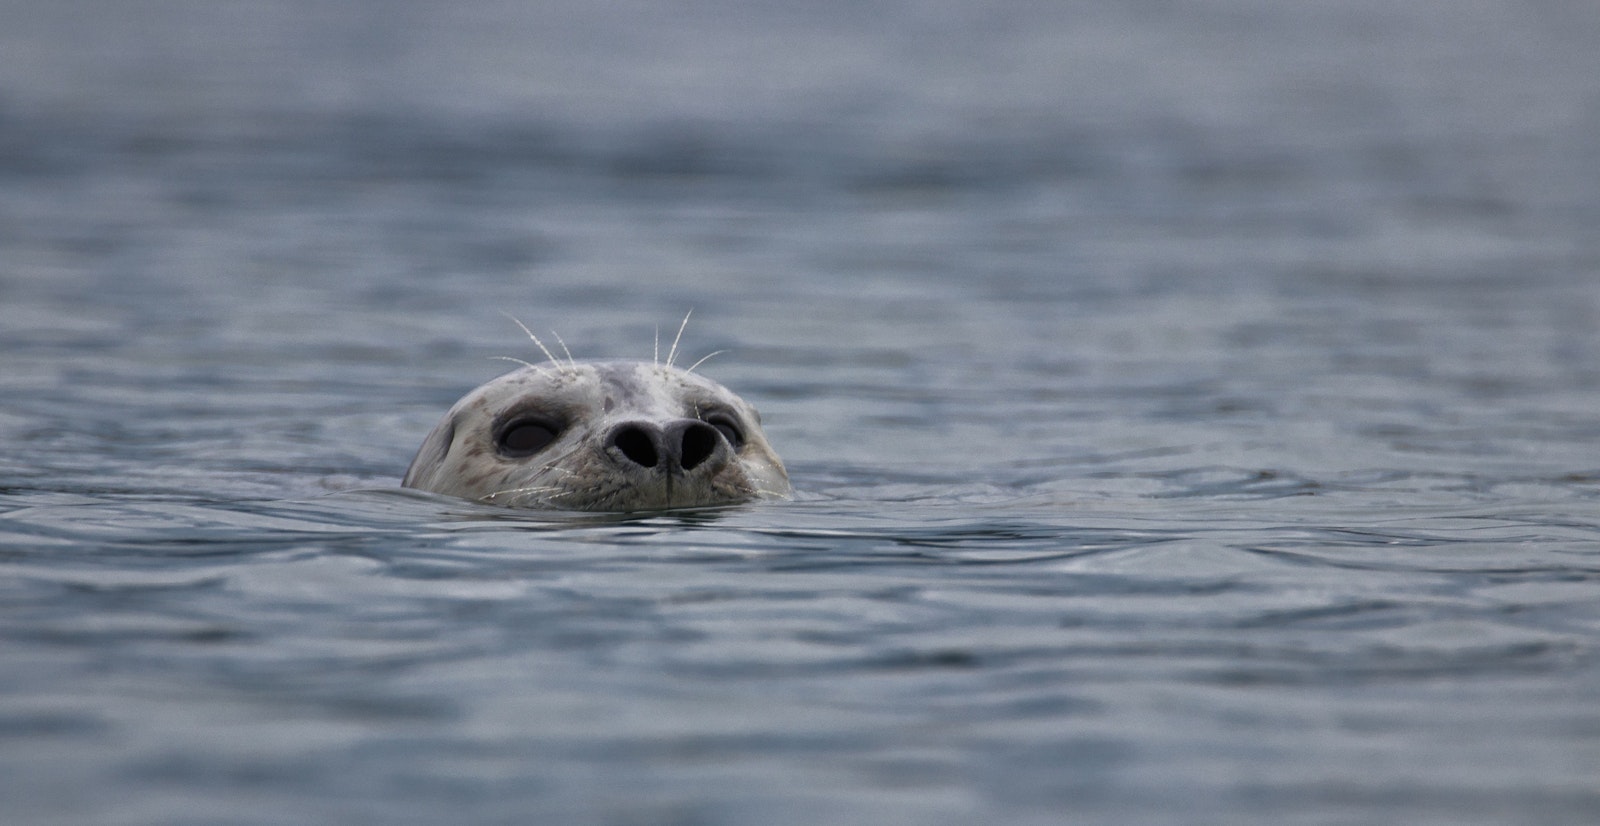 A harbor seals face can be seen coming out of the ocean water